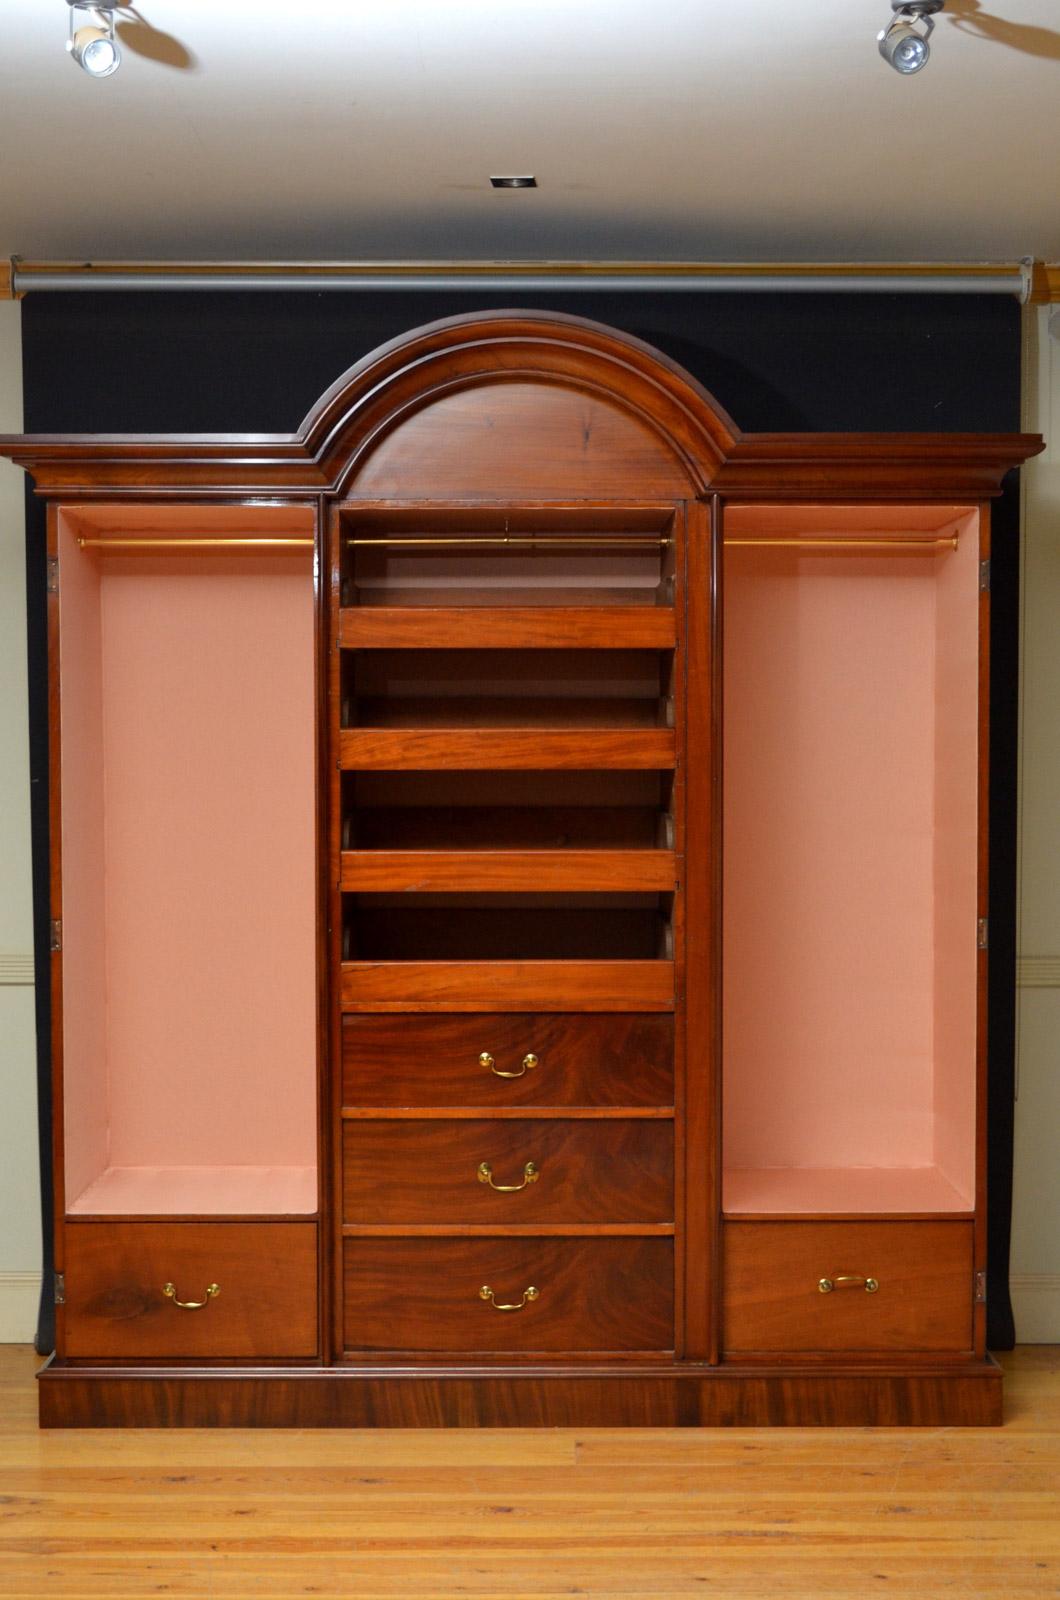 Sn4378, fine quality and very elegant, Victorian three-door breakfronted wardrobe in mahogany, having moulded cornice above figured mahogany frieze and mirrored and arched centre door enclosing original sliders (or short hanging) and drawers flanked